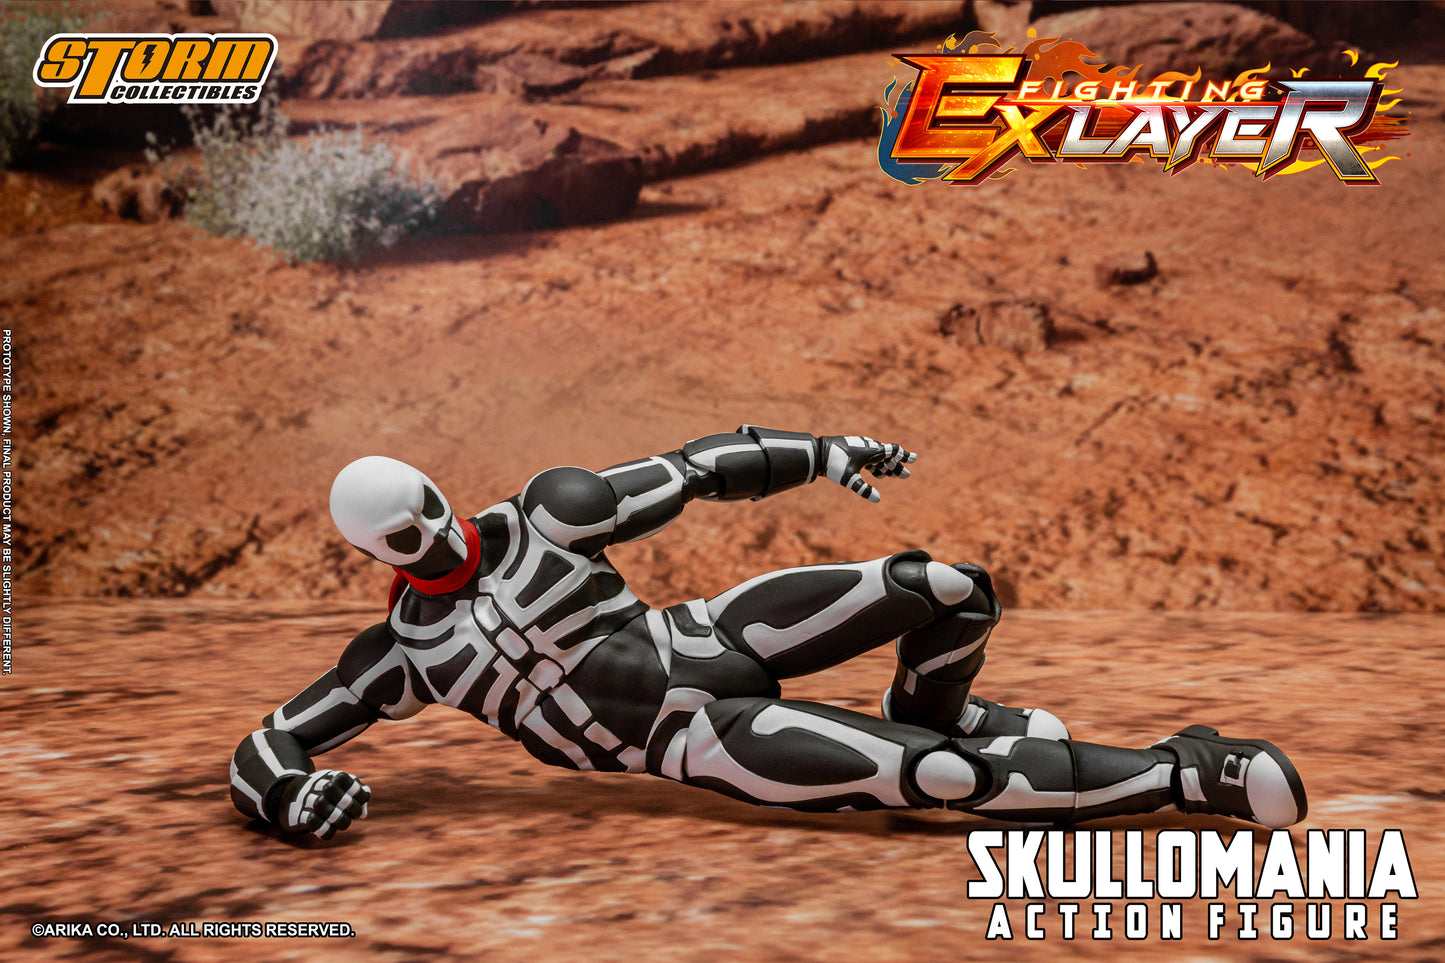 Street Fighter EX Layer Skullomania 1/12 Scale by Storm Collectibles sliding pose